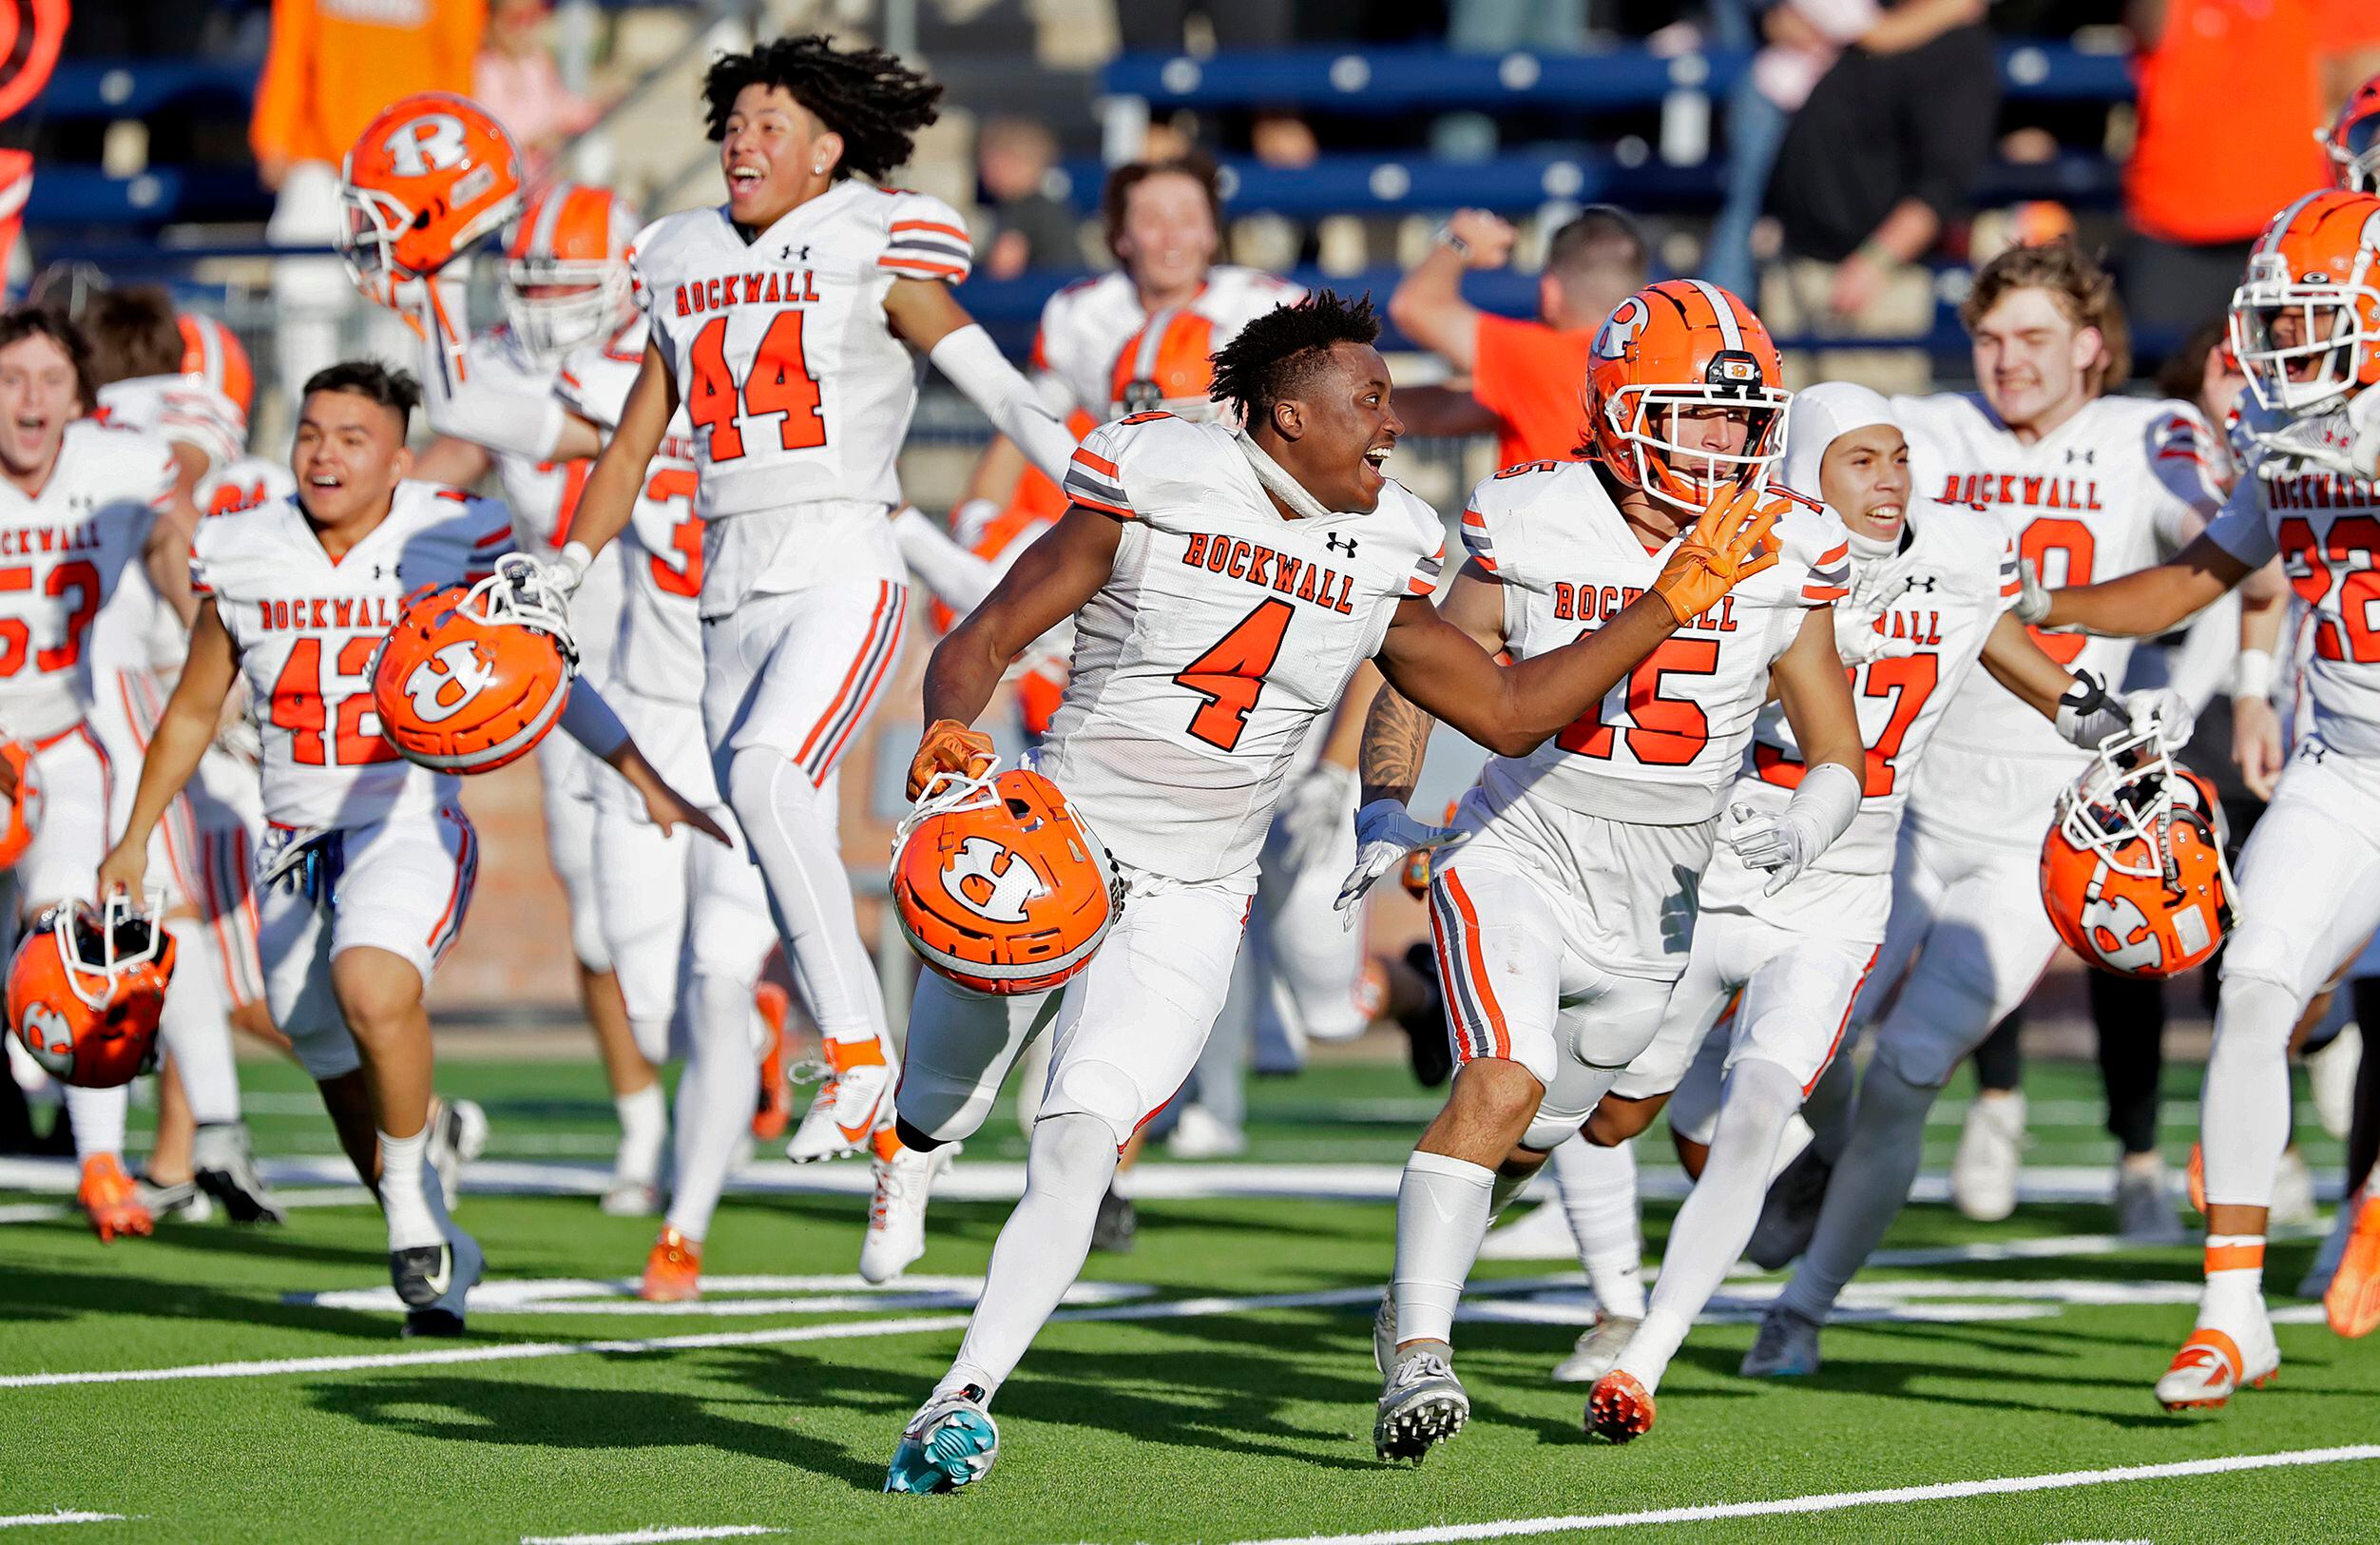 The Rockwall High School football team storms the field after holding on to win 46-43 as...